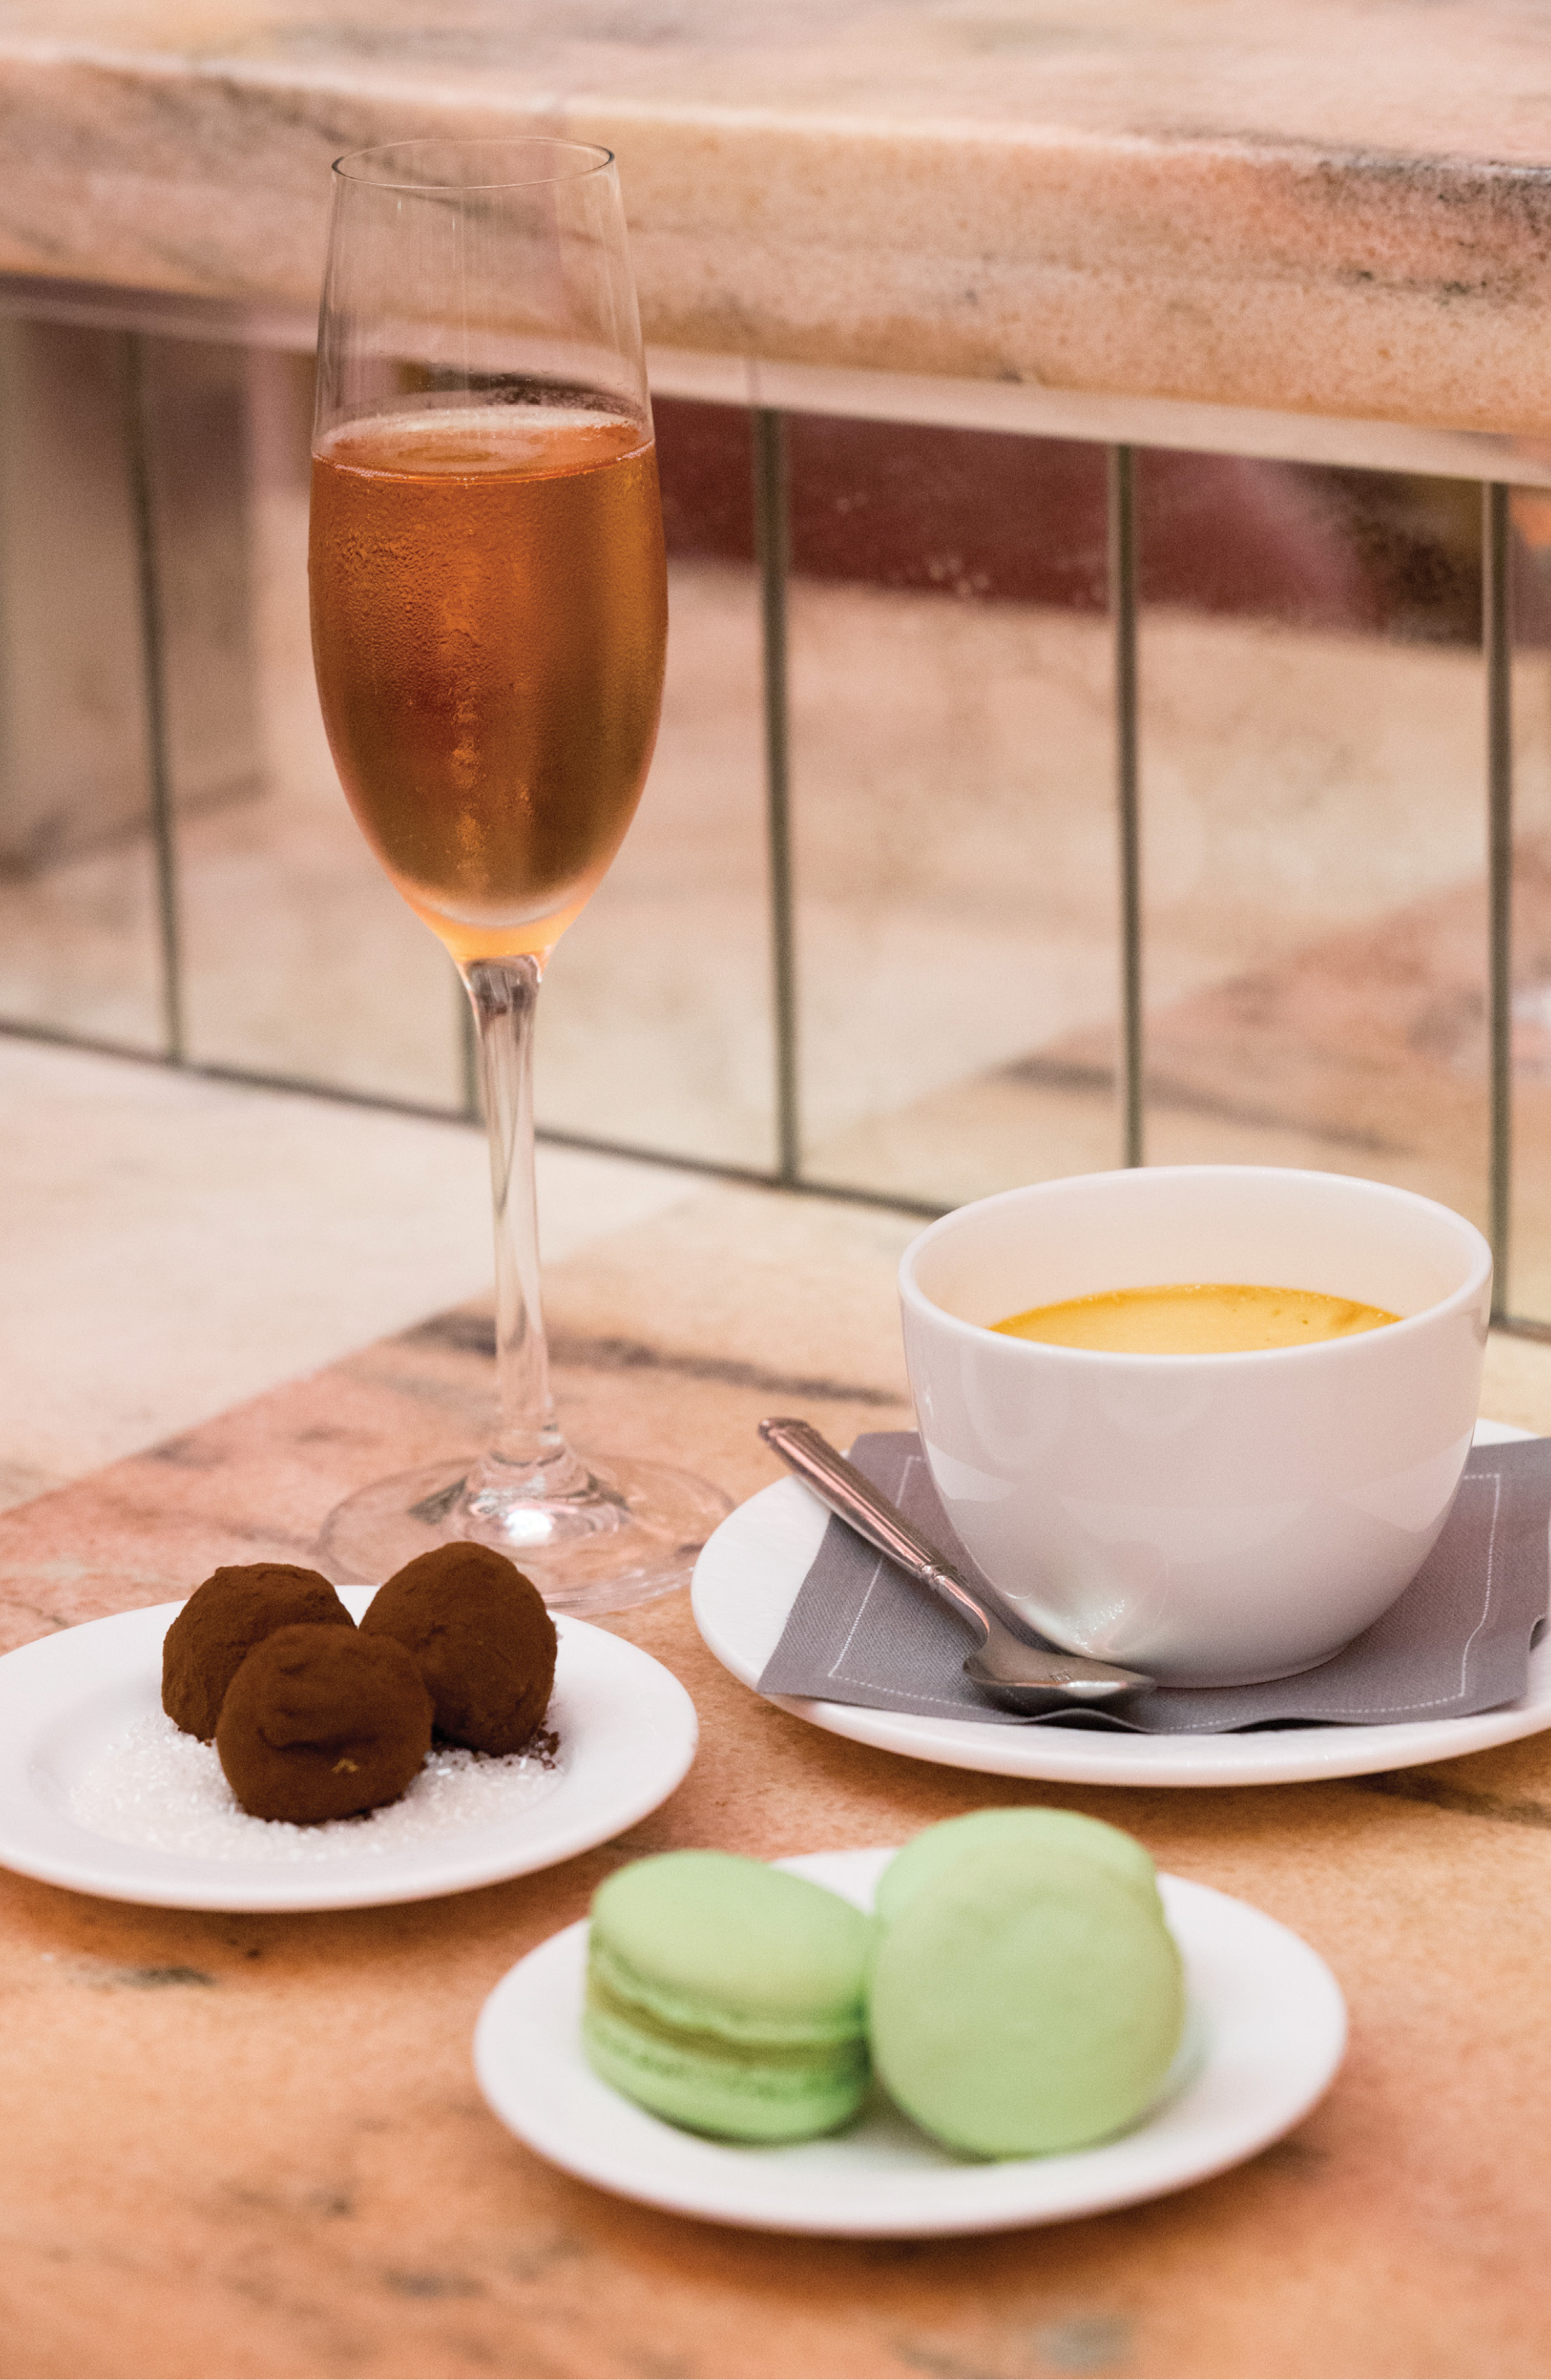 Toast of the Town: Chef Rémy Fünfrock’s (inset above) on-menu confections can be enjoyed throughout Hotel Bennett. At champagne bar Camellias, a glass of sparkling rosé makes for a perfect pairing with his sweets.